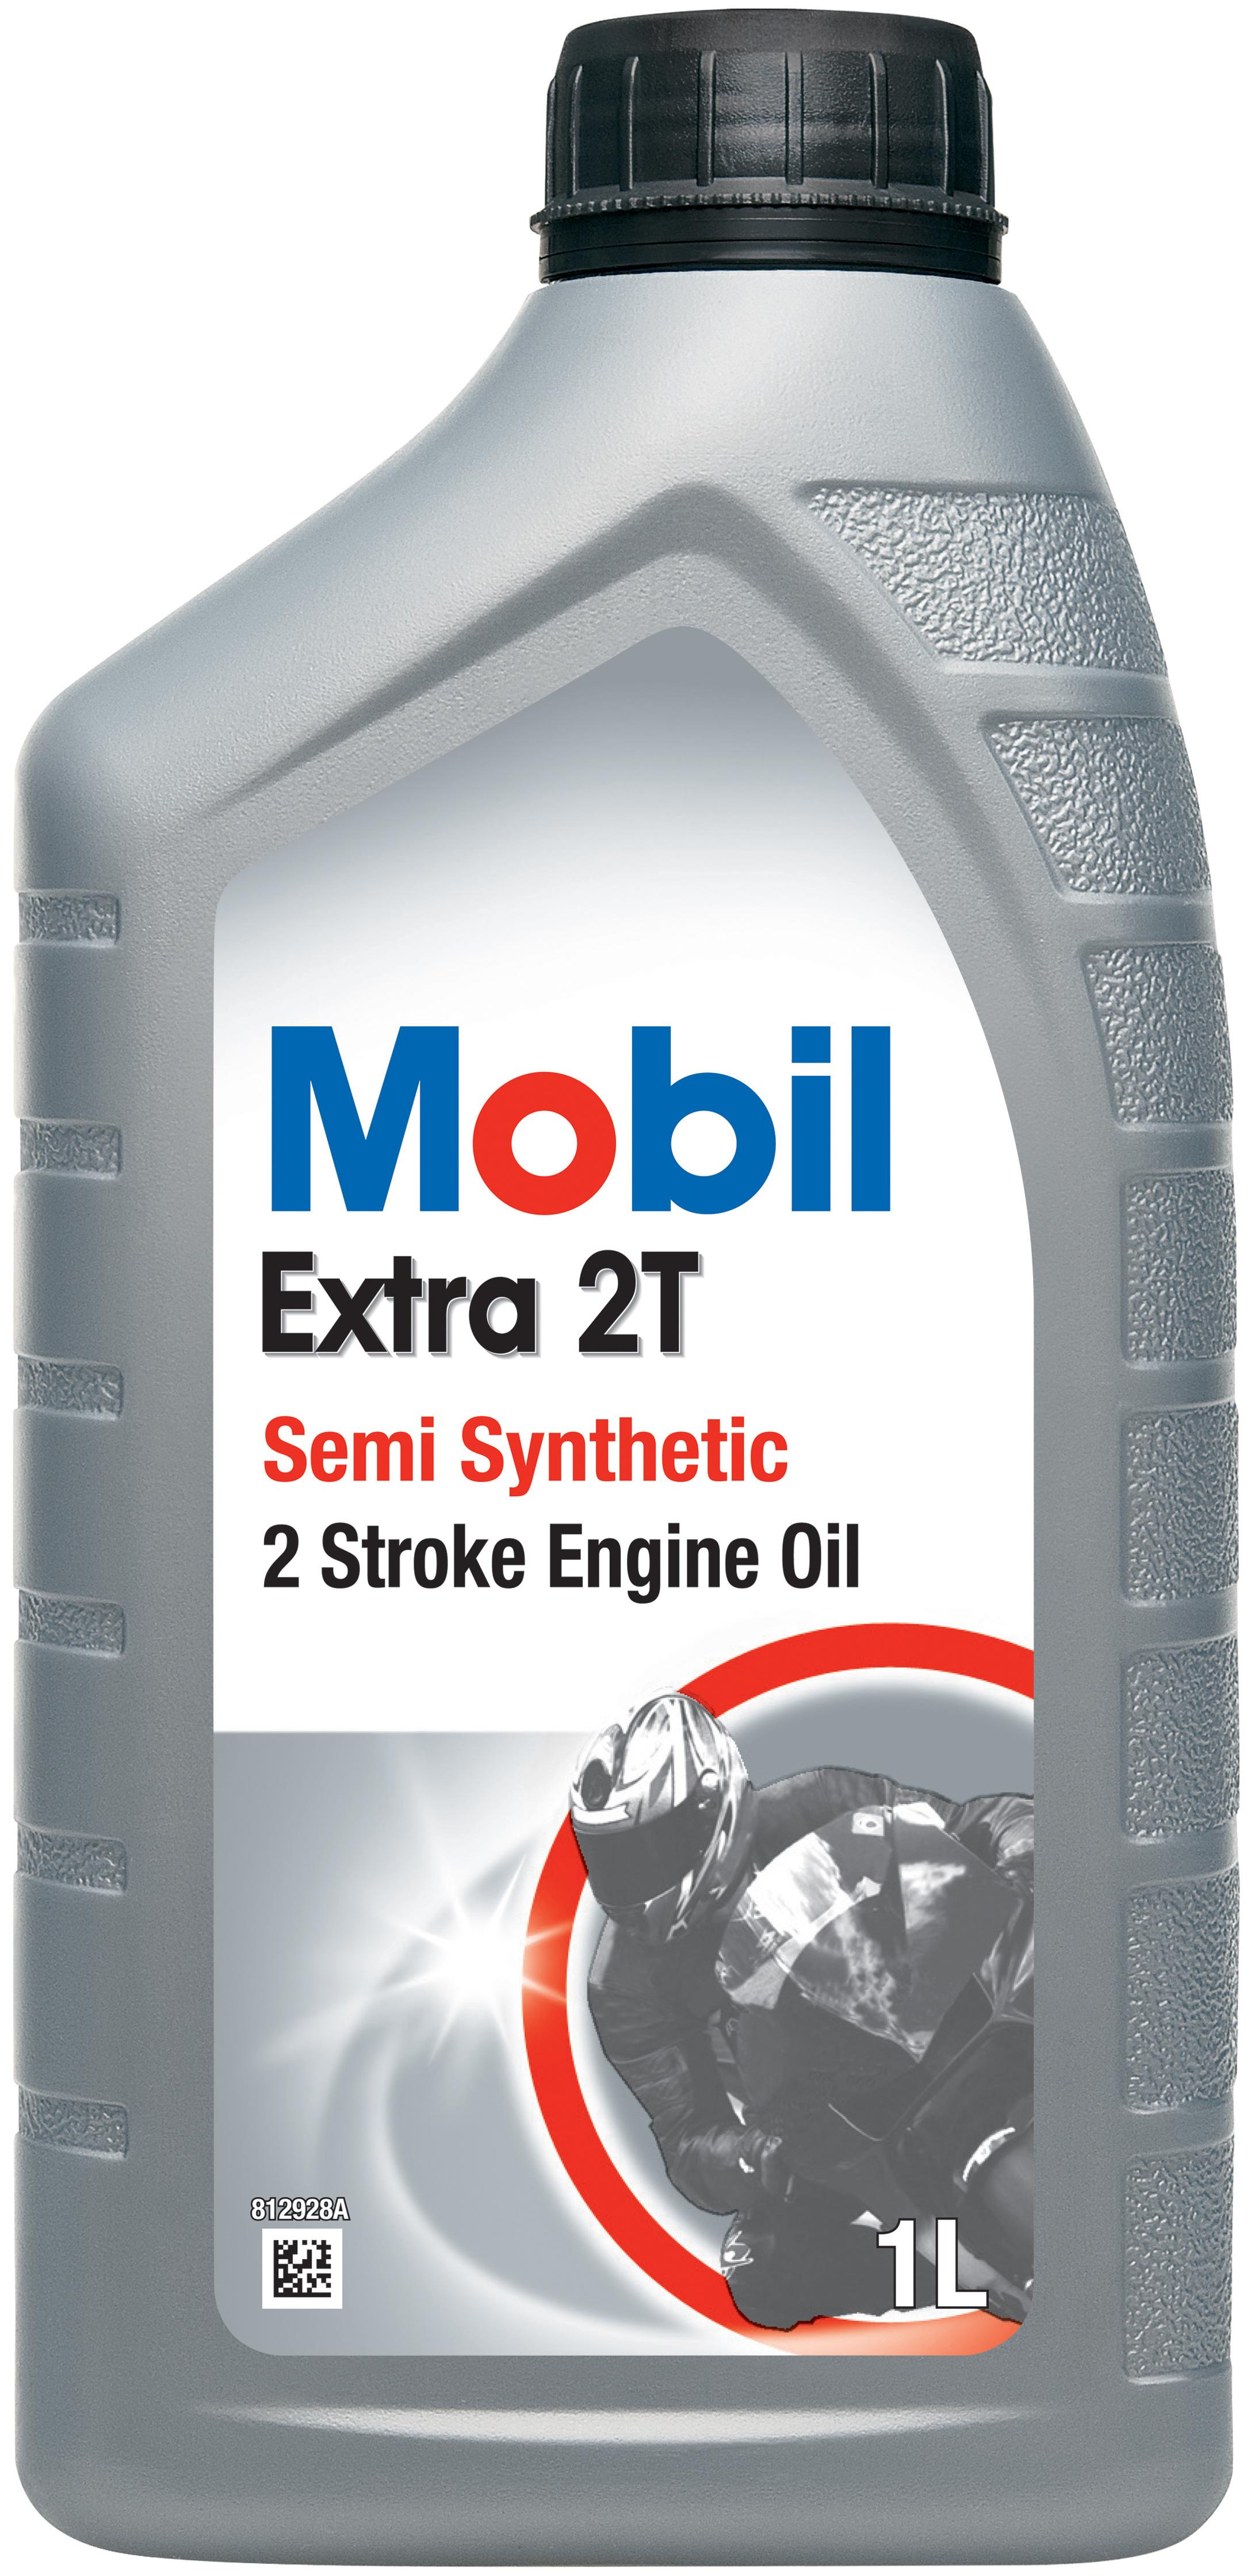 Mobil Extra 2T Motorcycle Oil 1 Litre